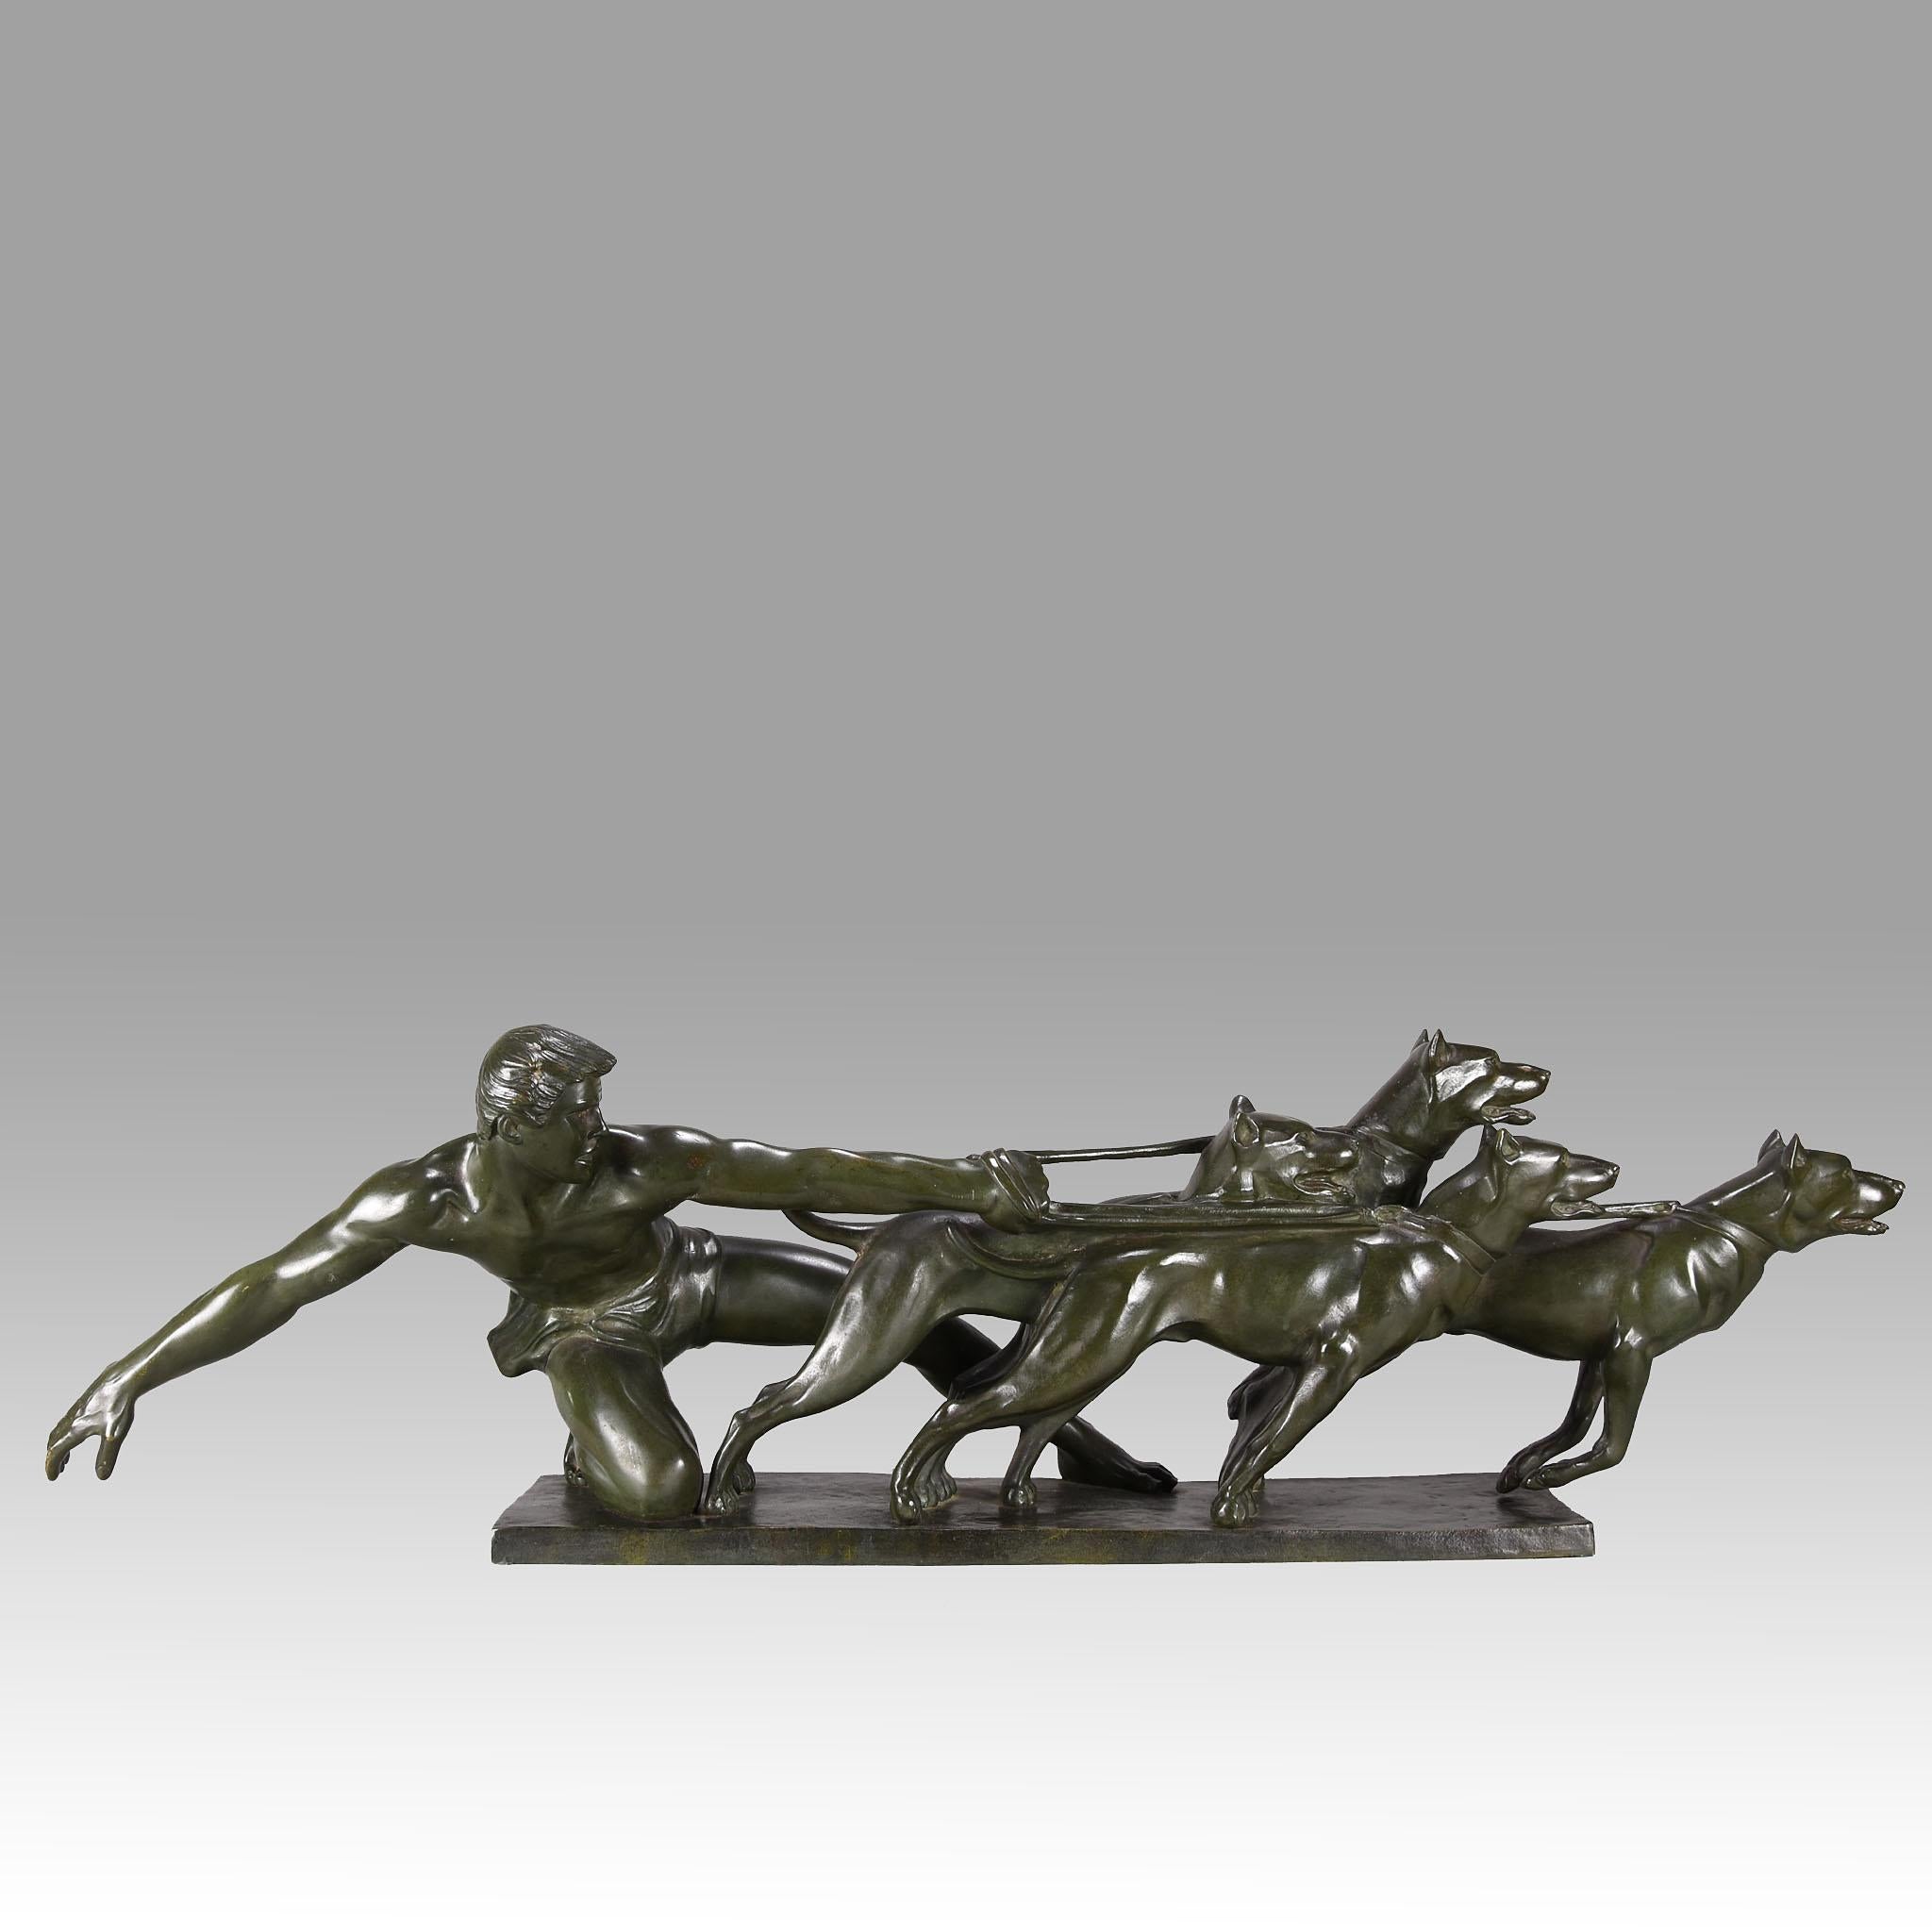 A tremendous early 20th century Art Deco bronze group of a strong athletic man holding the leashes of four powerful hounds as they strain to be released. The bronze exhibiting a rich green patinated surface with excellent hand finished surface